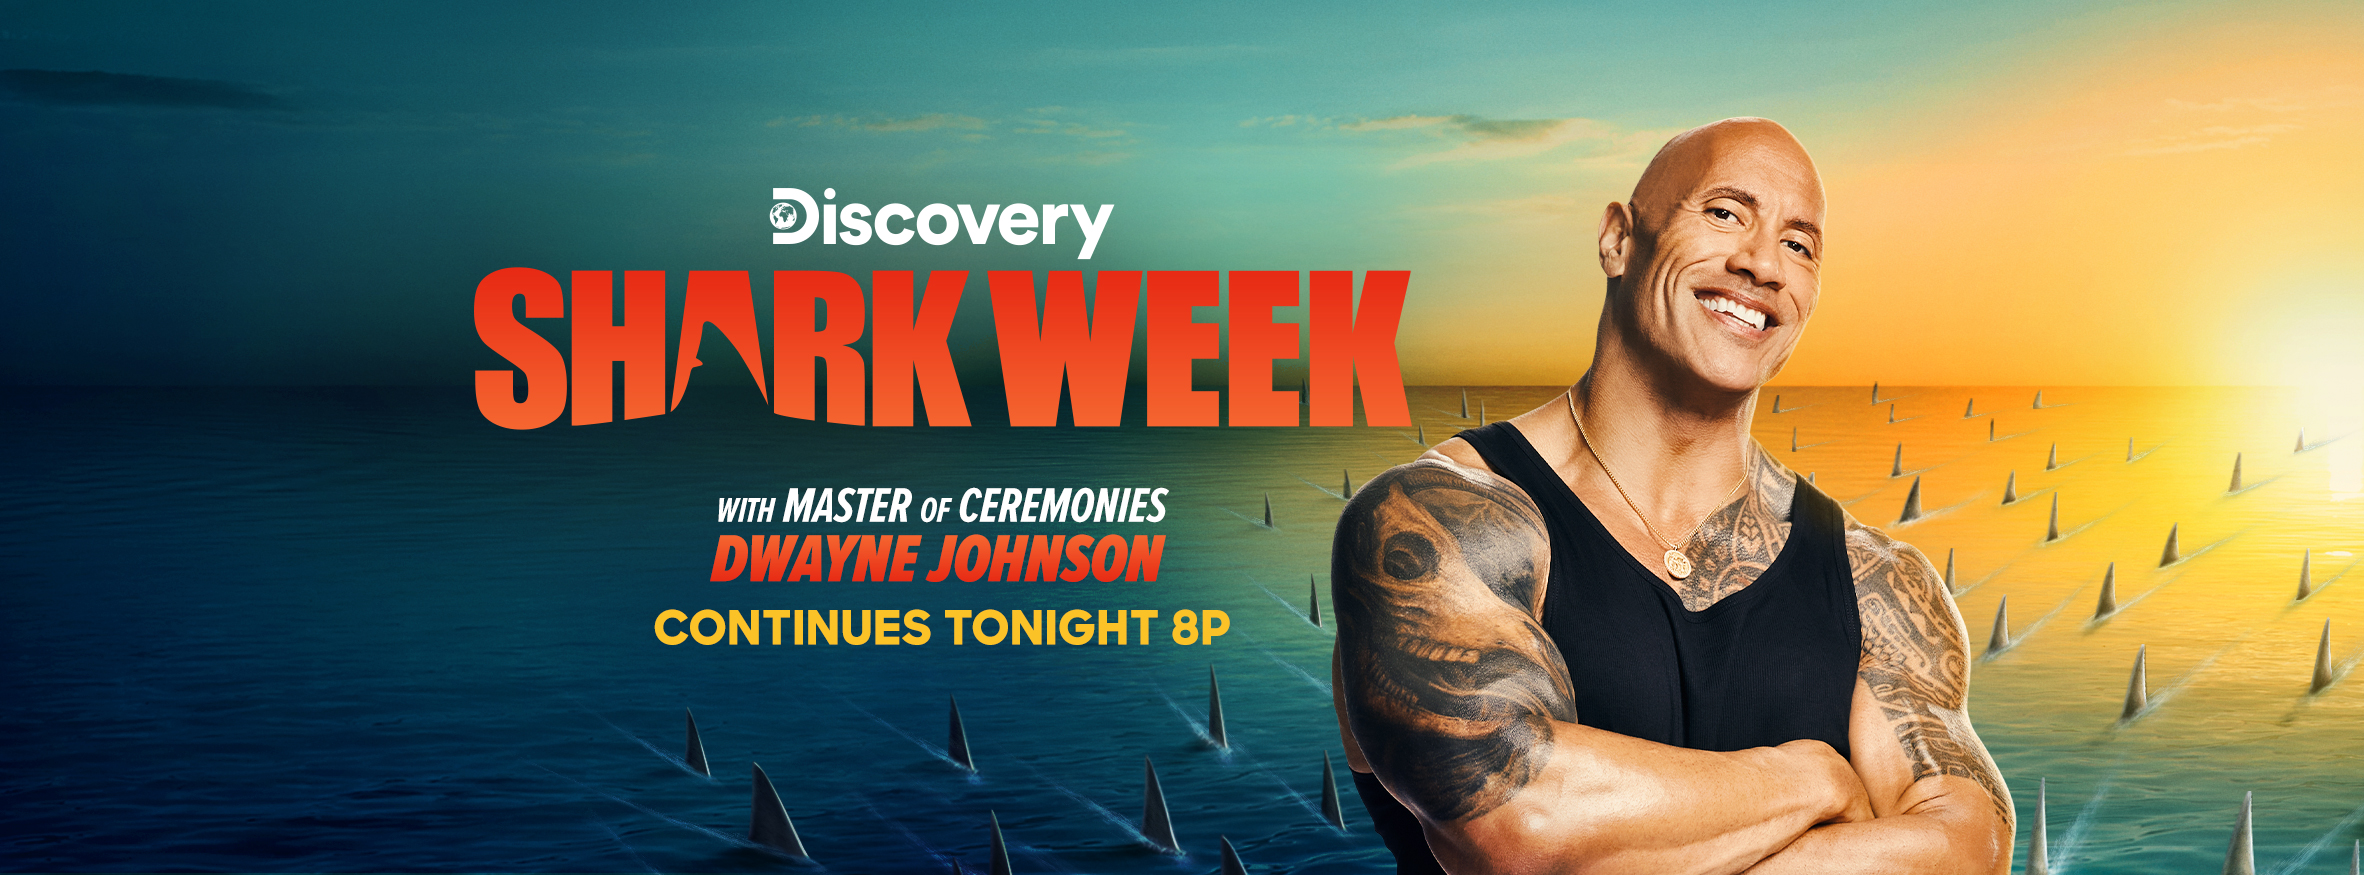 Discovery's Shark Week 2022 Grand Finale Winner Name Announced Contestants Prize Money